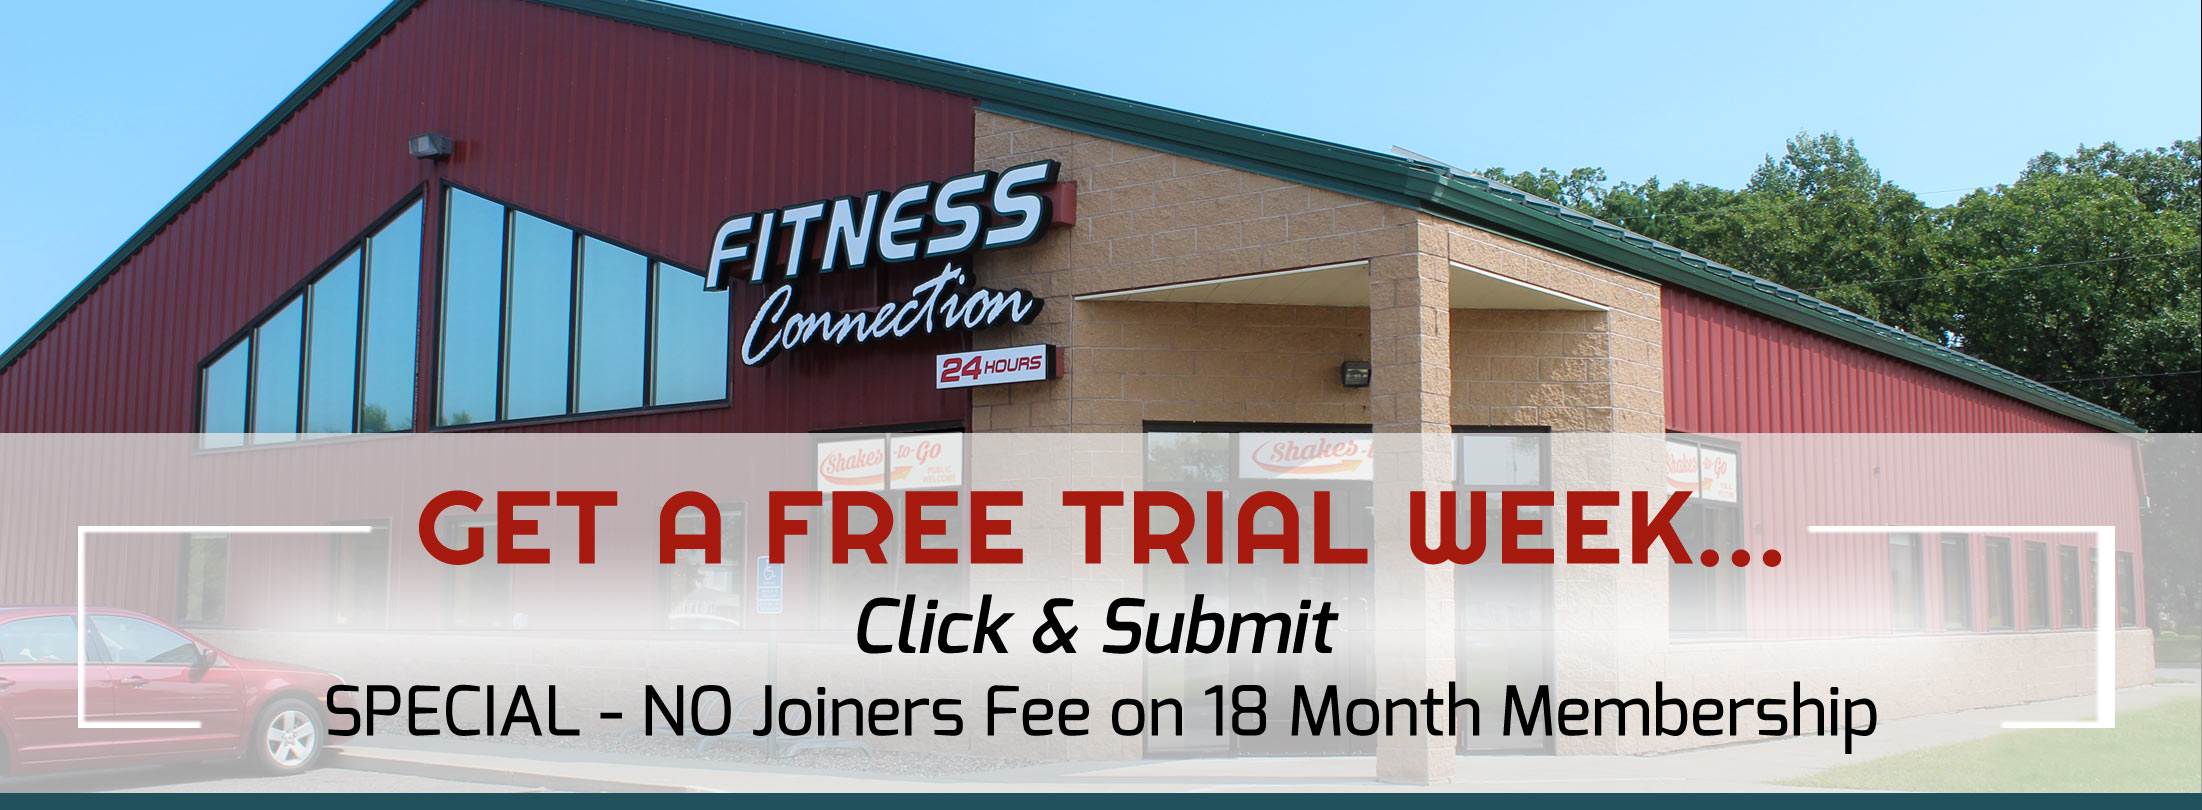 Fitness Connection 24 Hours | Little Falls, Minnesota Gym ...